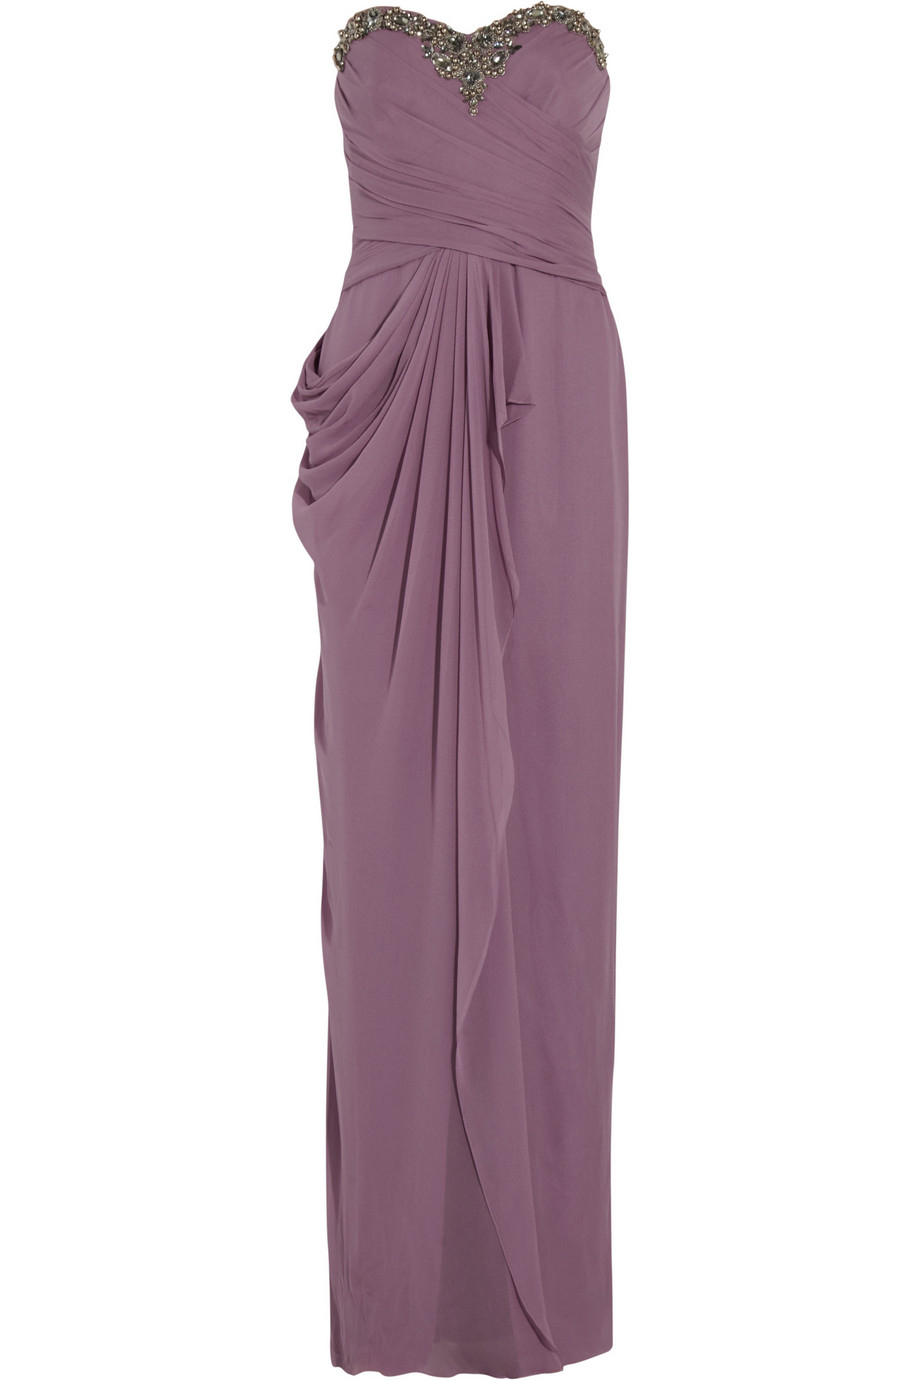 Notte By Marchesa Embellished Draped Silk Chiffon Gown in Purple ...